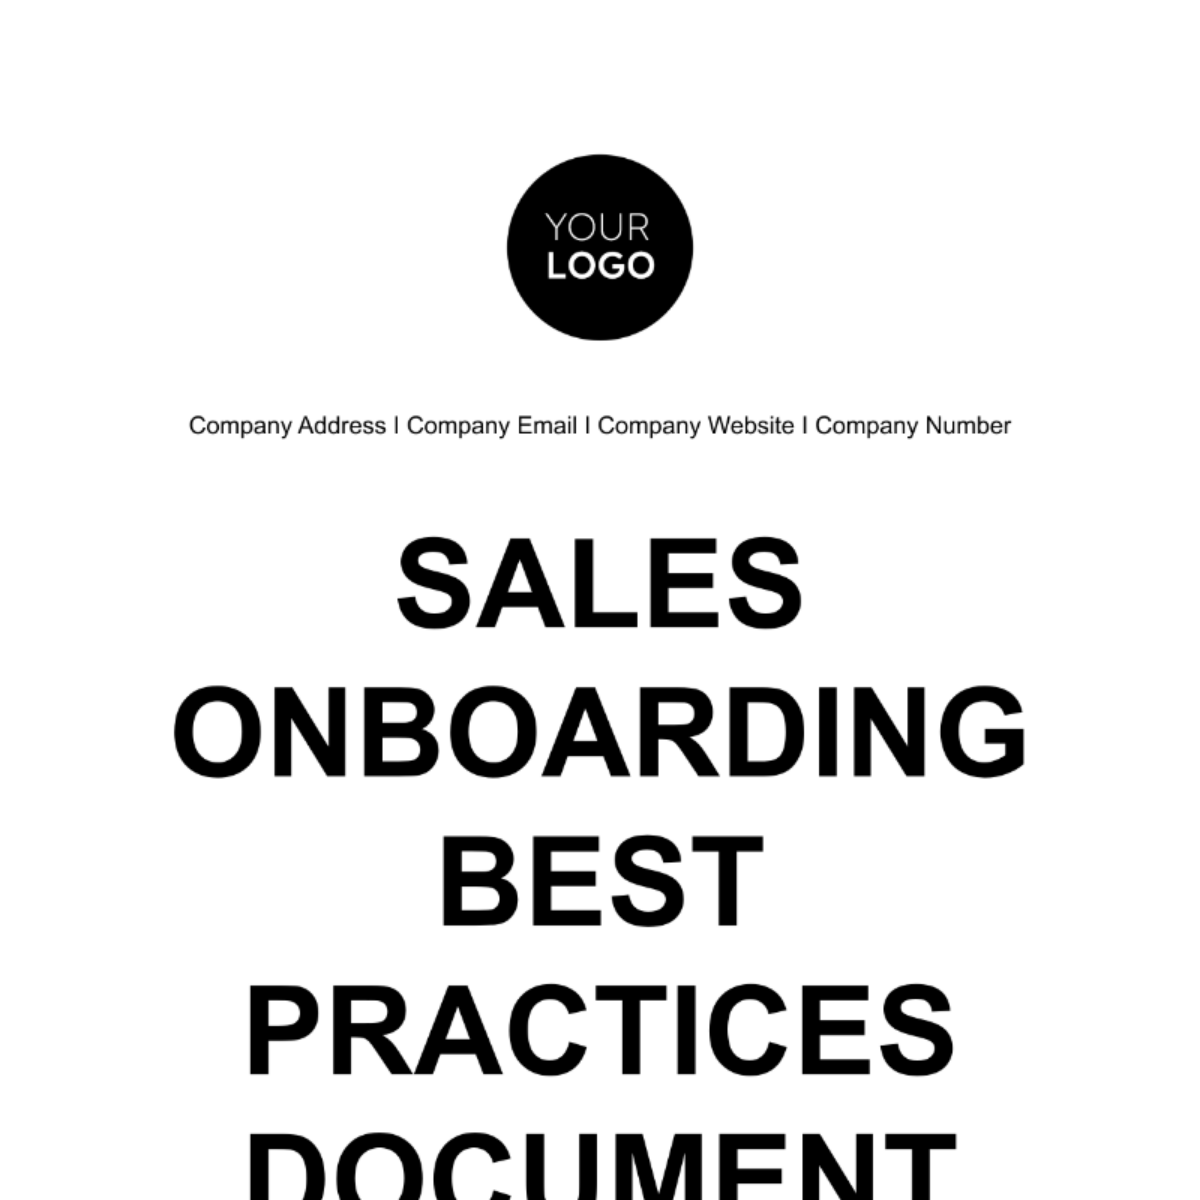 Free Sales Onboarding Best Practices Document Template